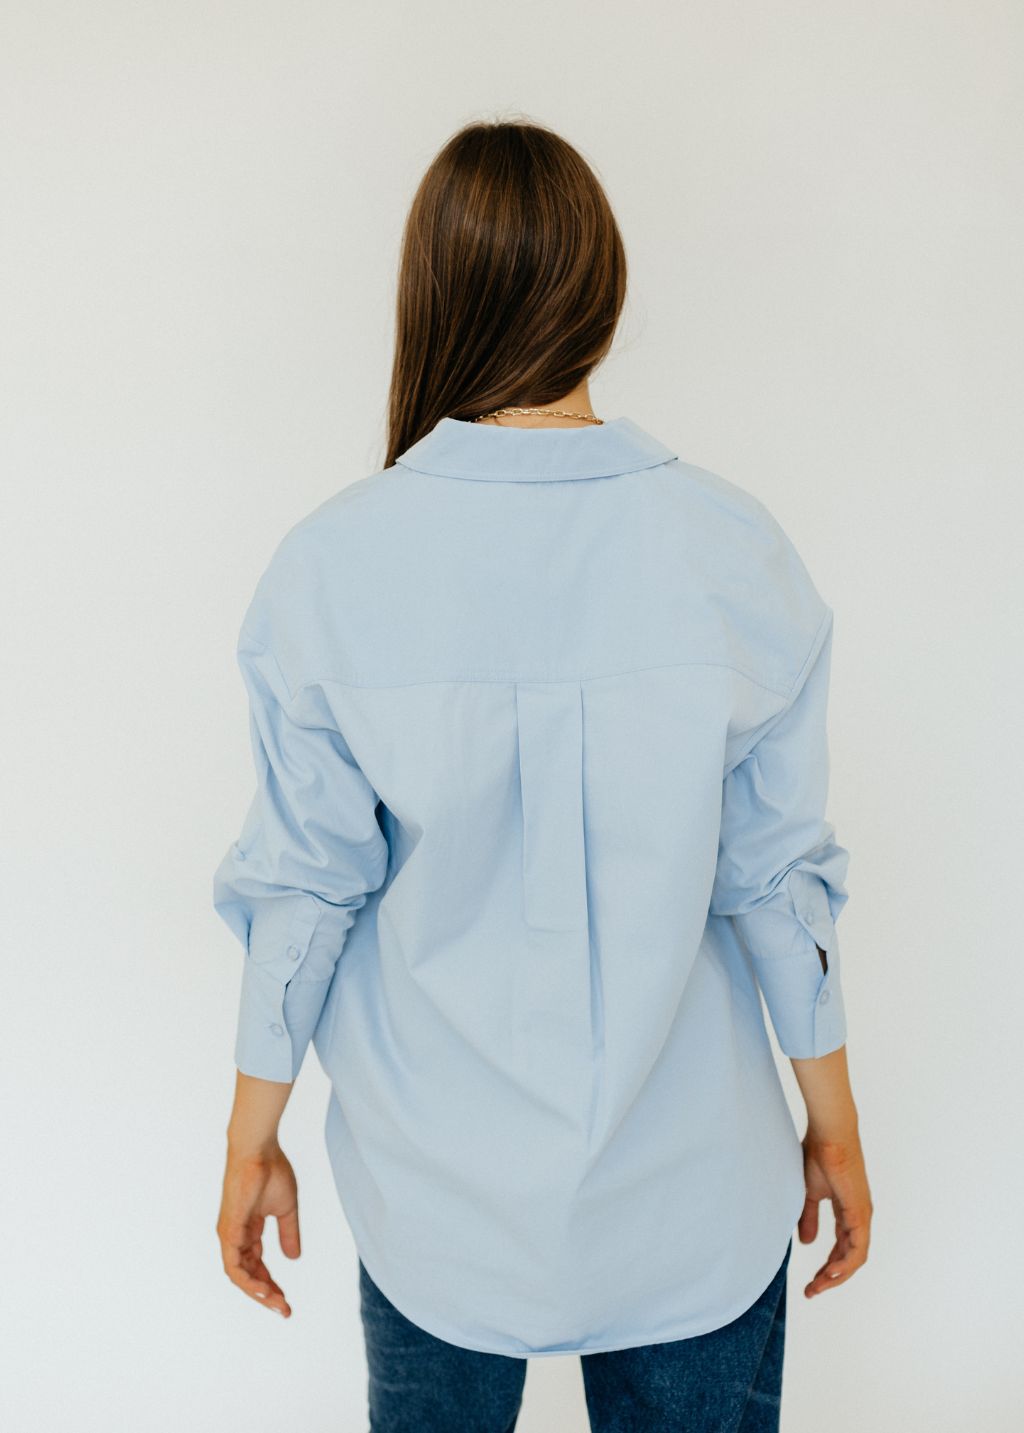 The Mika Shirt in Blue by Anine Bing ~ Available online and in store now at  CLoTH #aninebing #restocked